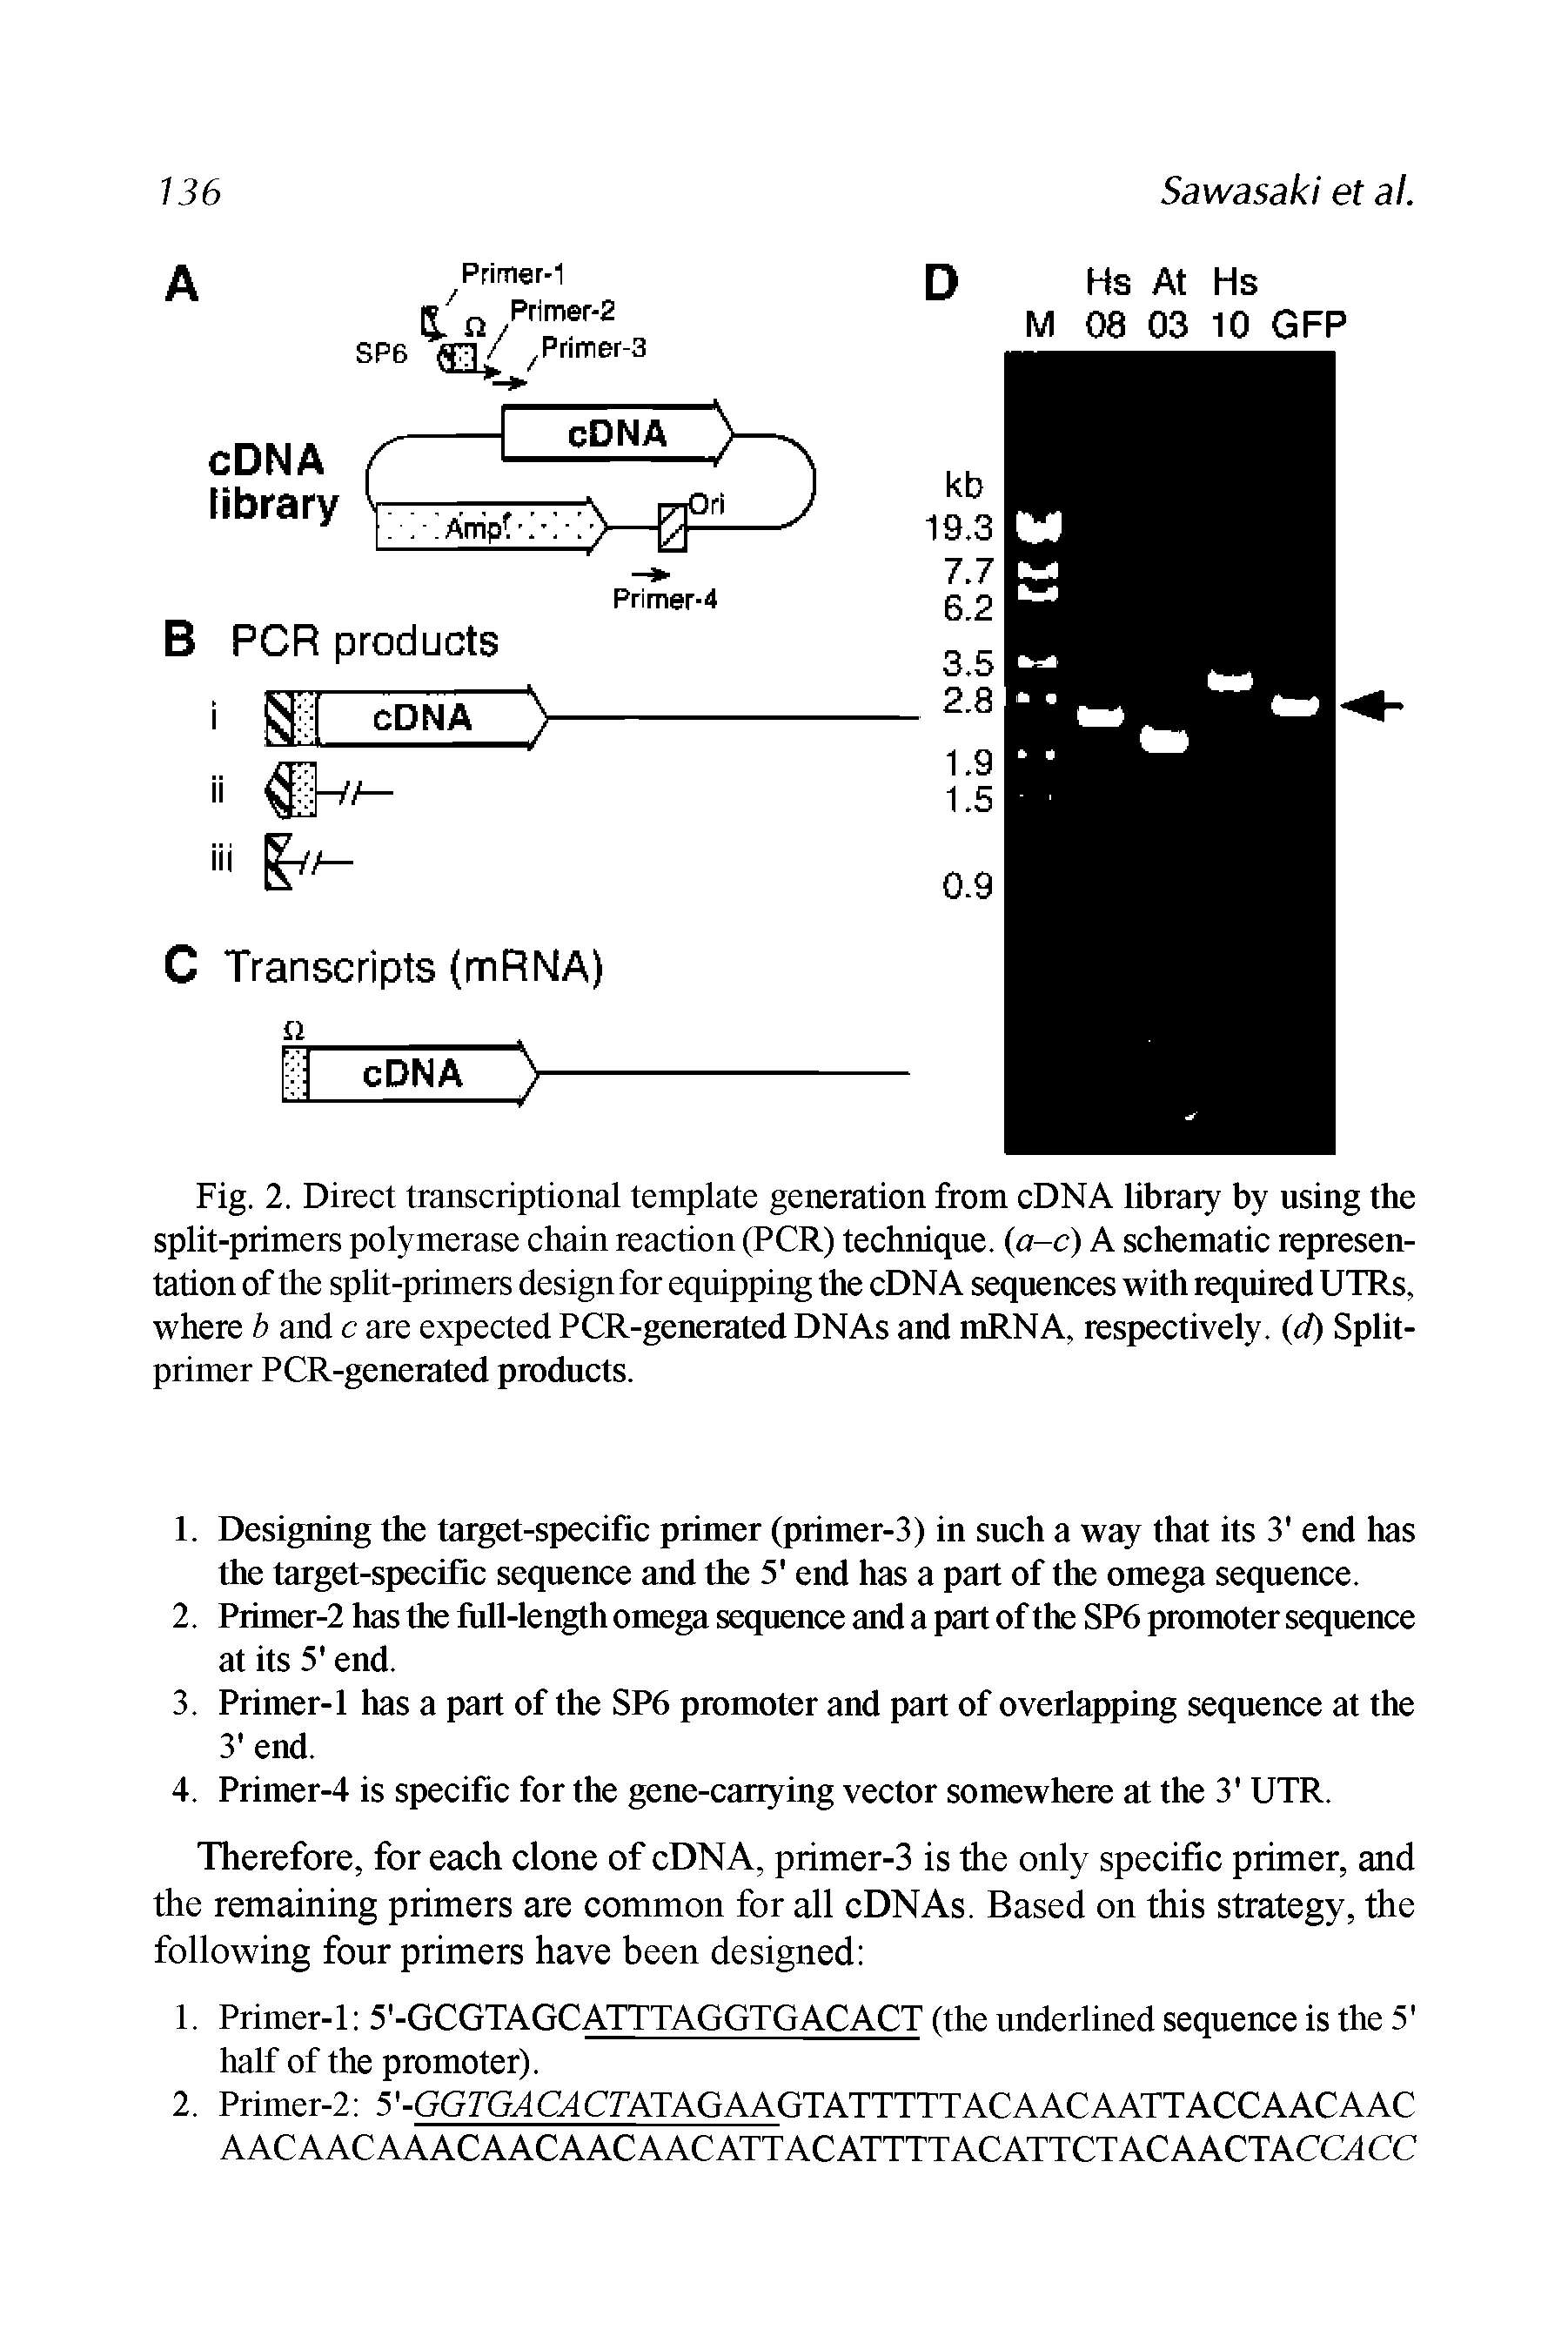 Fig. 2. Direct transcriptional template generation from cDNA library by using the split-primers polymerase chain reaction (PCR) technique. (a-c) A schematic representation of the split-primers design for equipping the cDNA sequences with required UTRs, where b and c are expected PCR-generated DNAs and mRNA, respectively, (cl) Split-primer PCR-generated products.